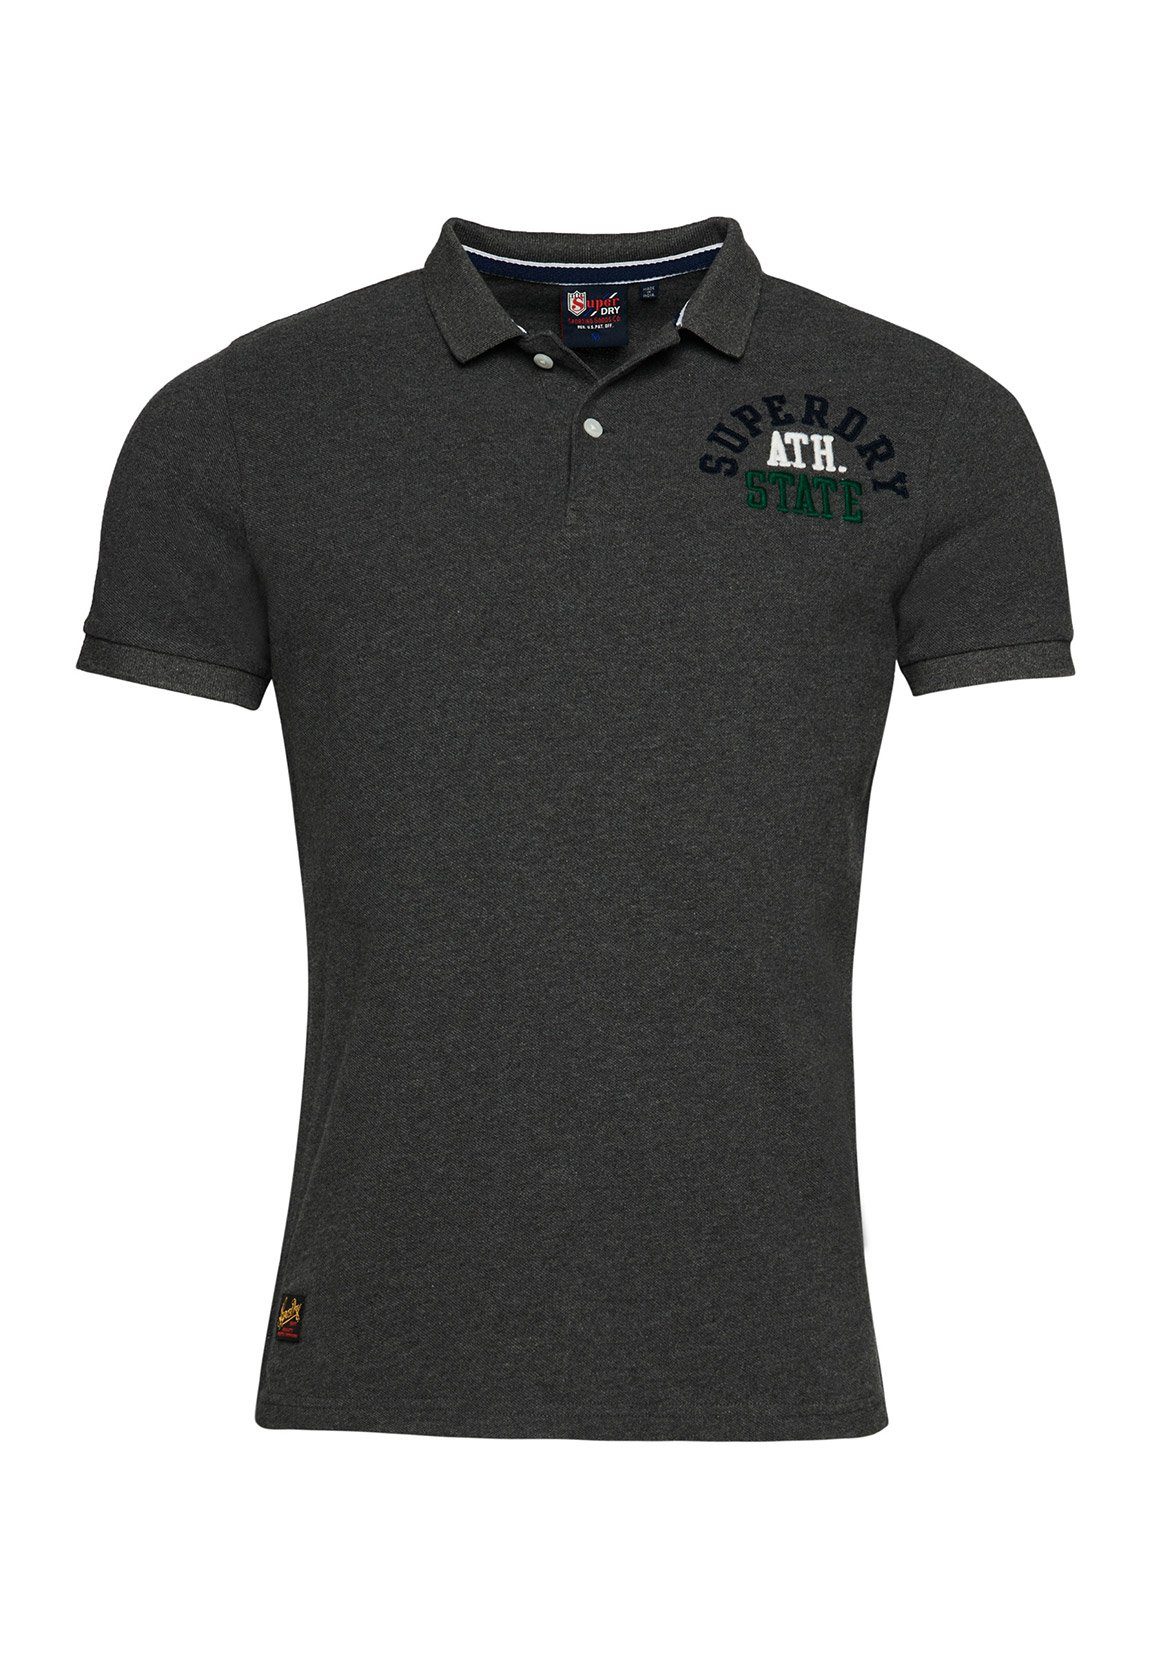 Polo Superdry POLO Poloshirt Dunkelgrau SUPERSTATE Marl Rich Charcoal Superdry VINTAGE